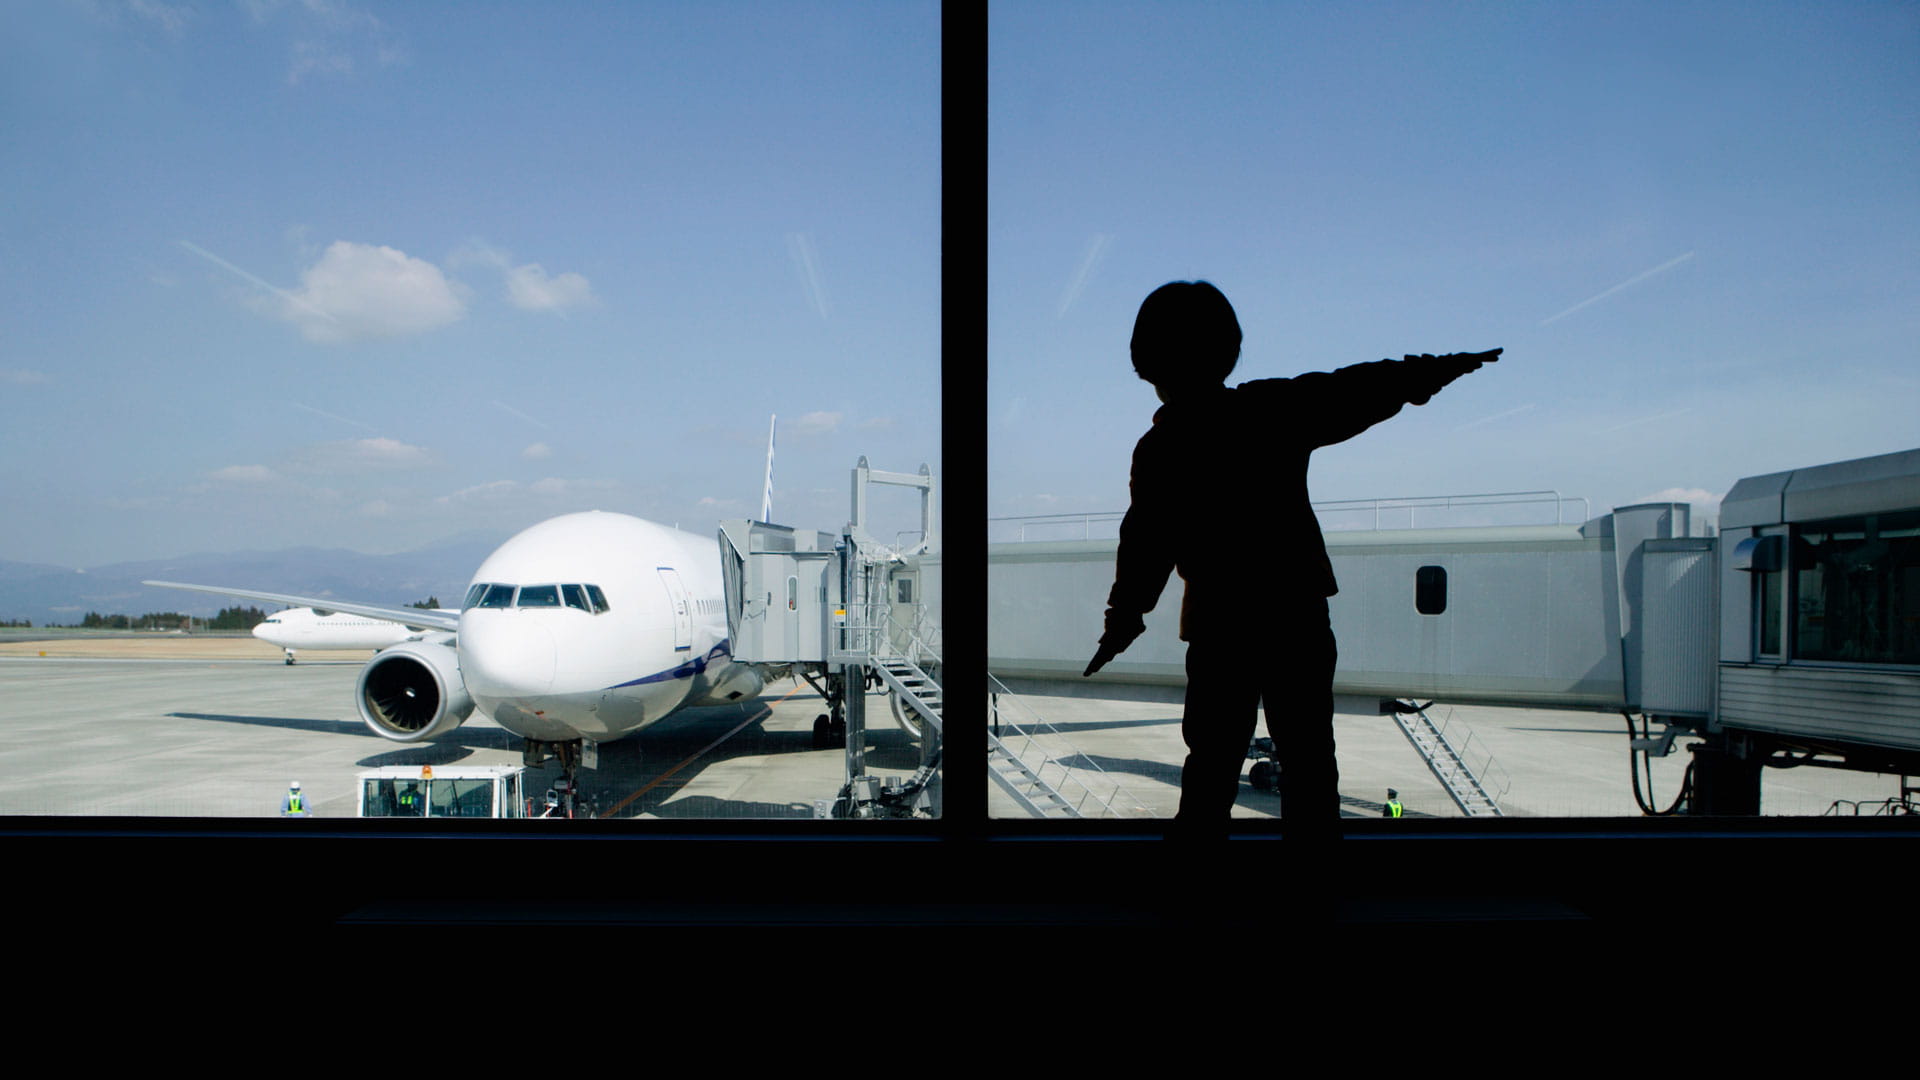 Child looking out an airport terminal at an airplane